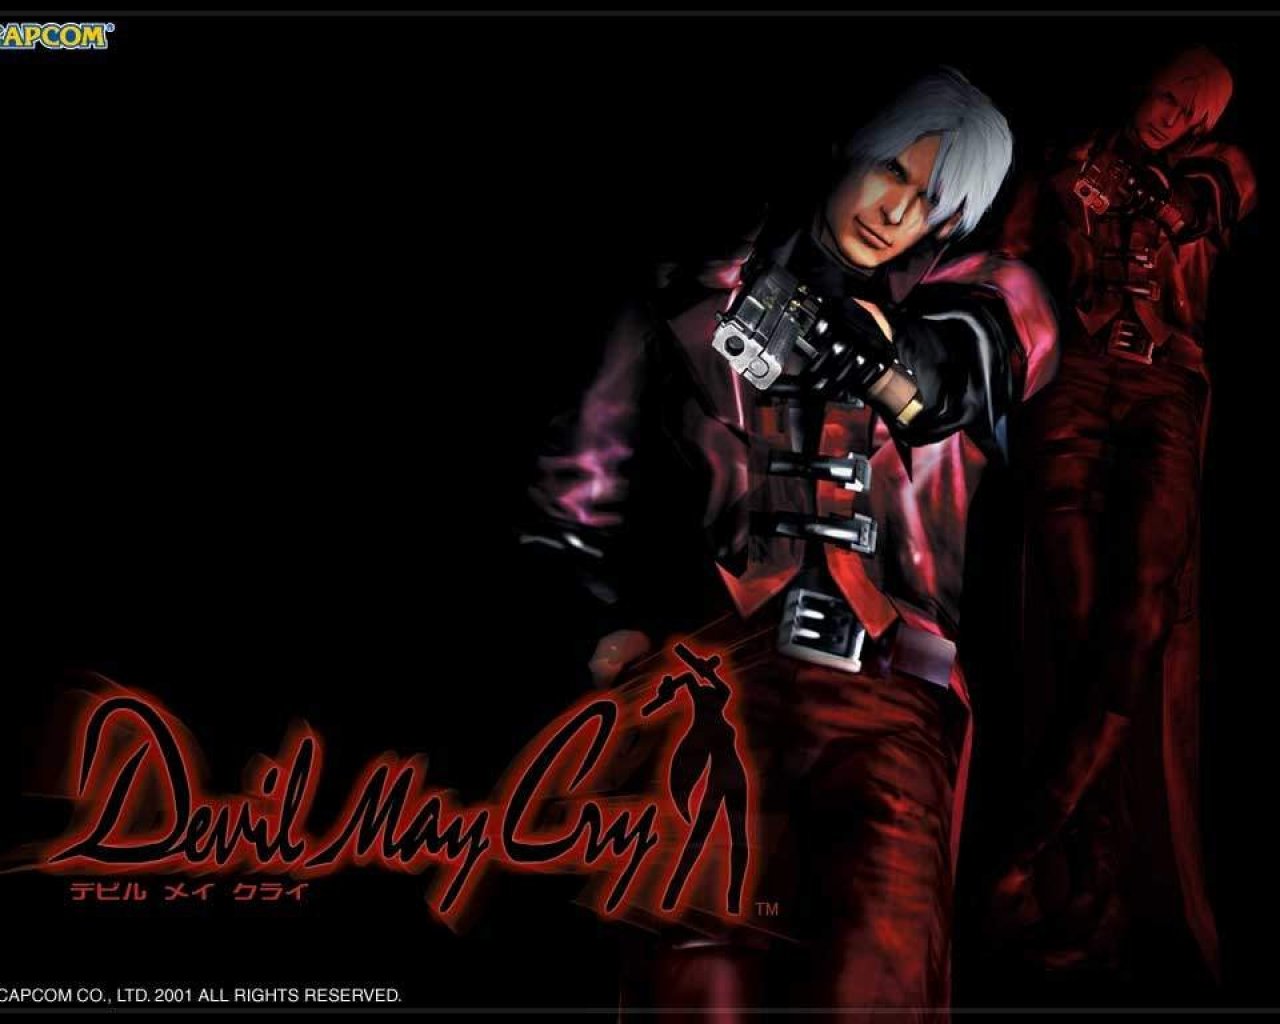 devil may cry hd wallpapers devil may cry hd wallpapers devil may cry